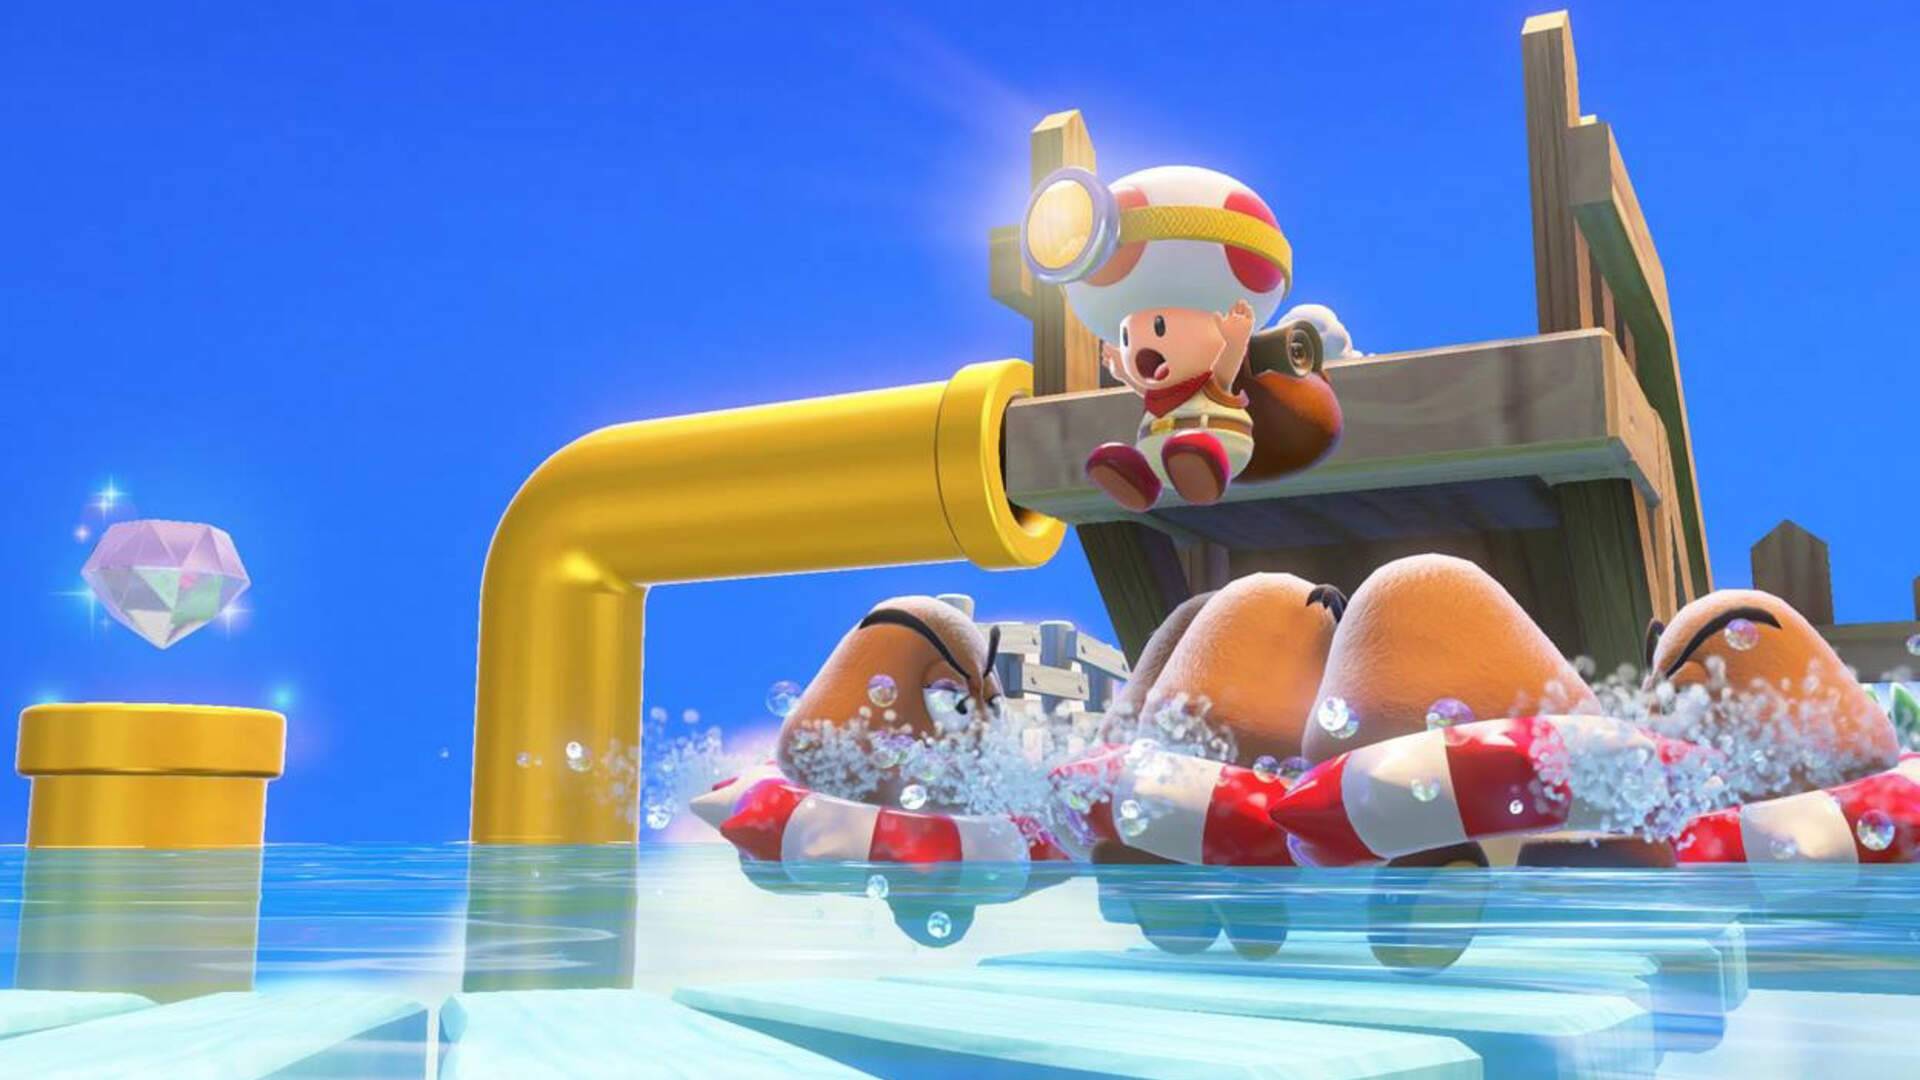 Captain Toad: Treasure Tracker Is Free To Try With The Latest NSO Game Trial thumbnail